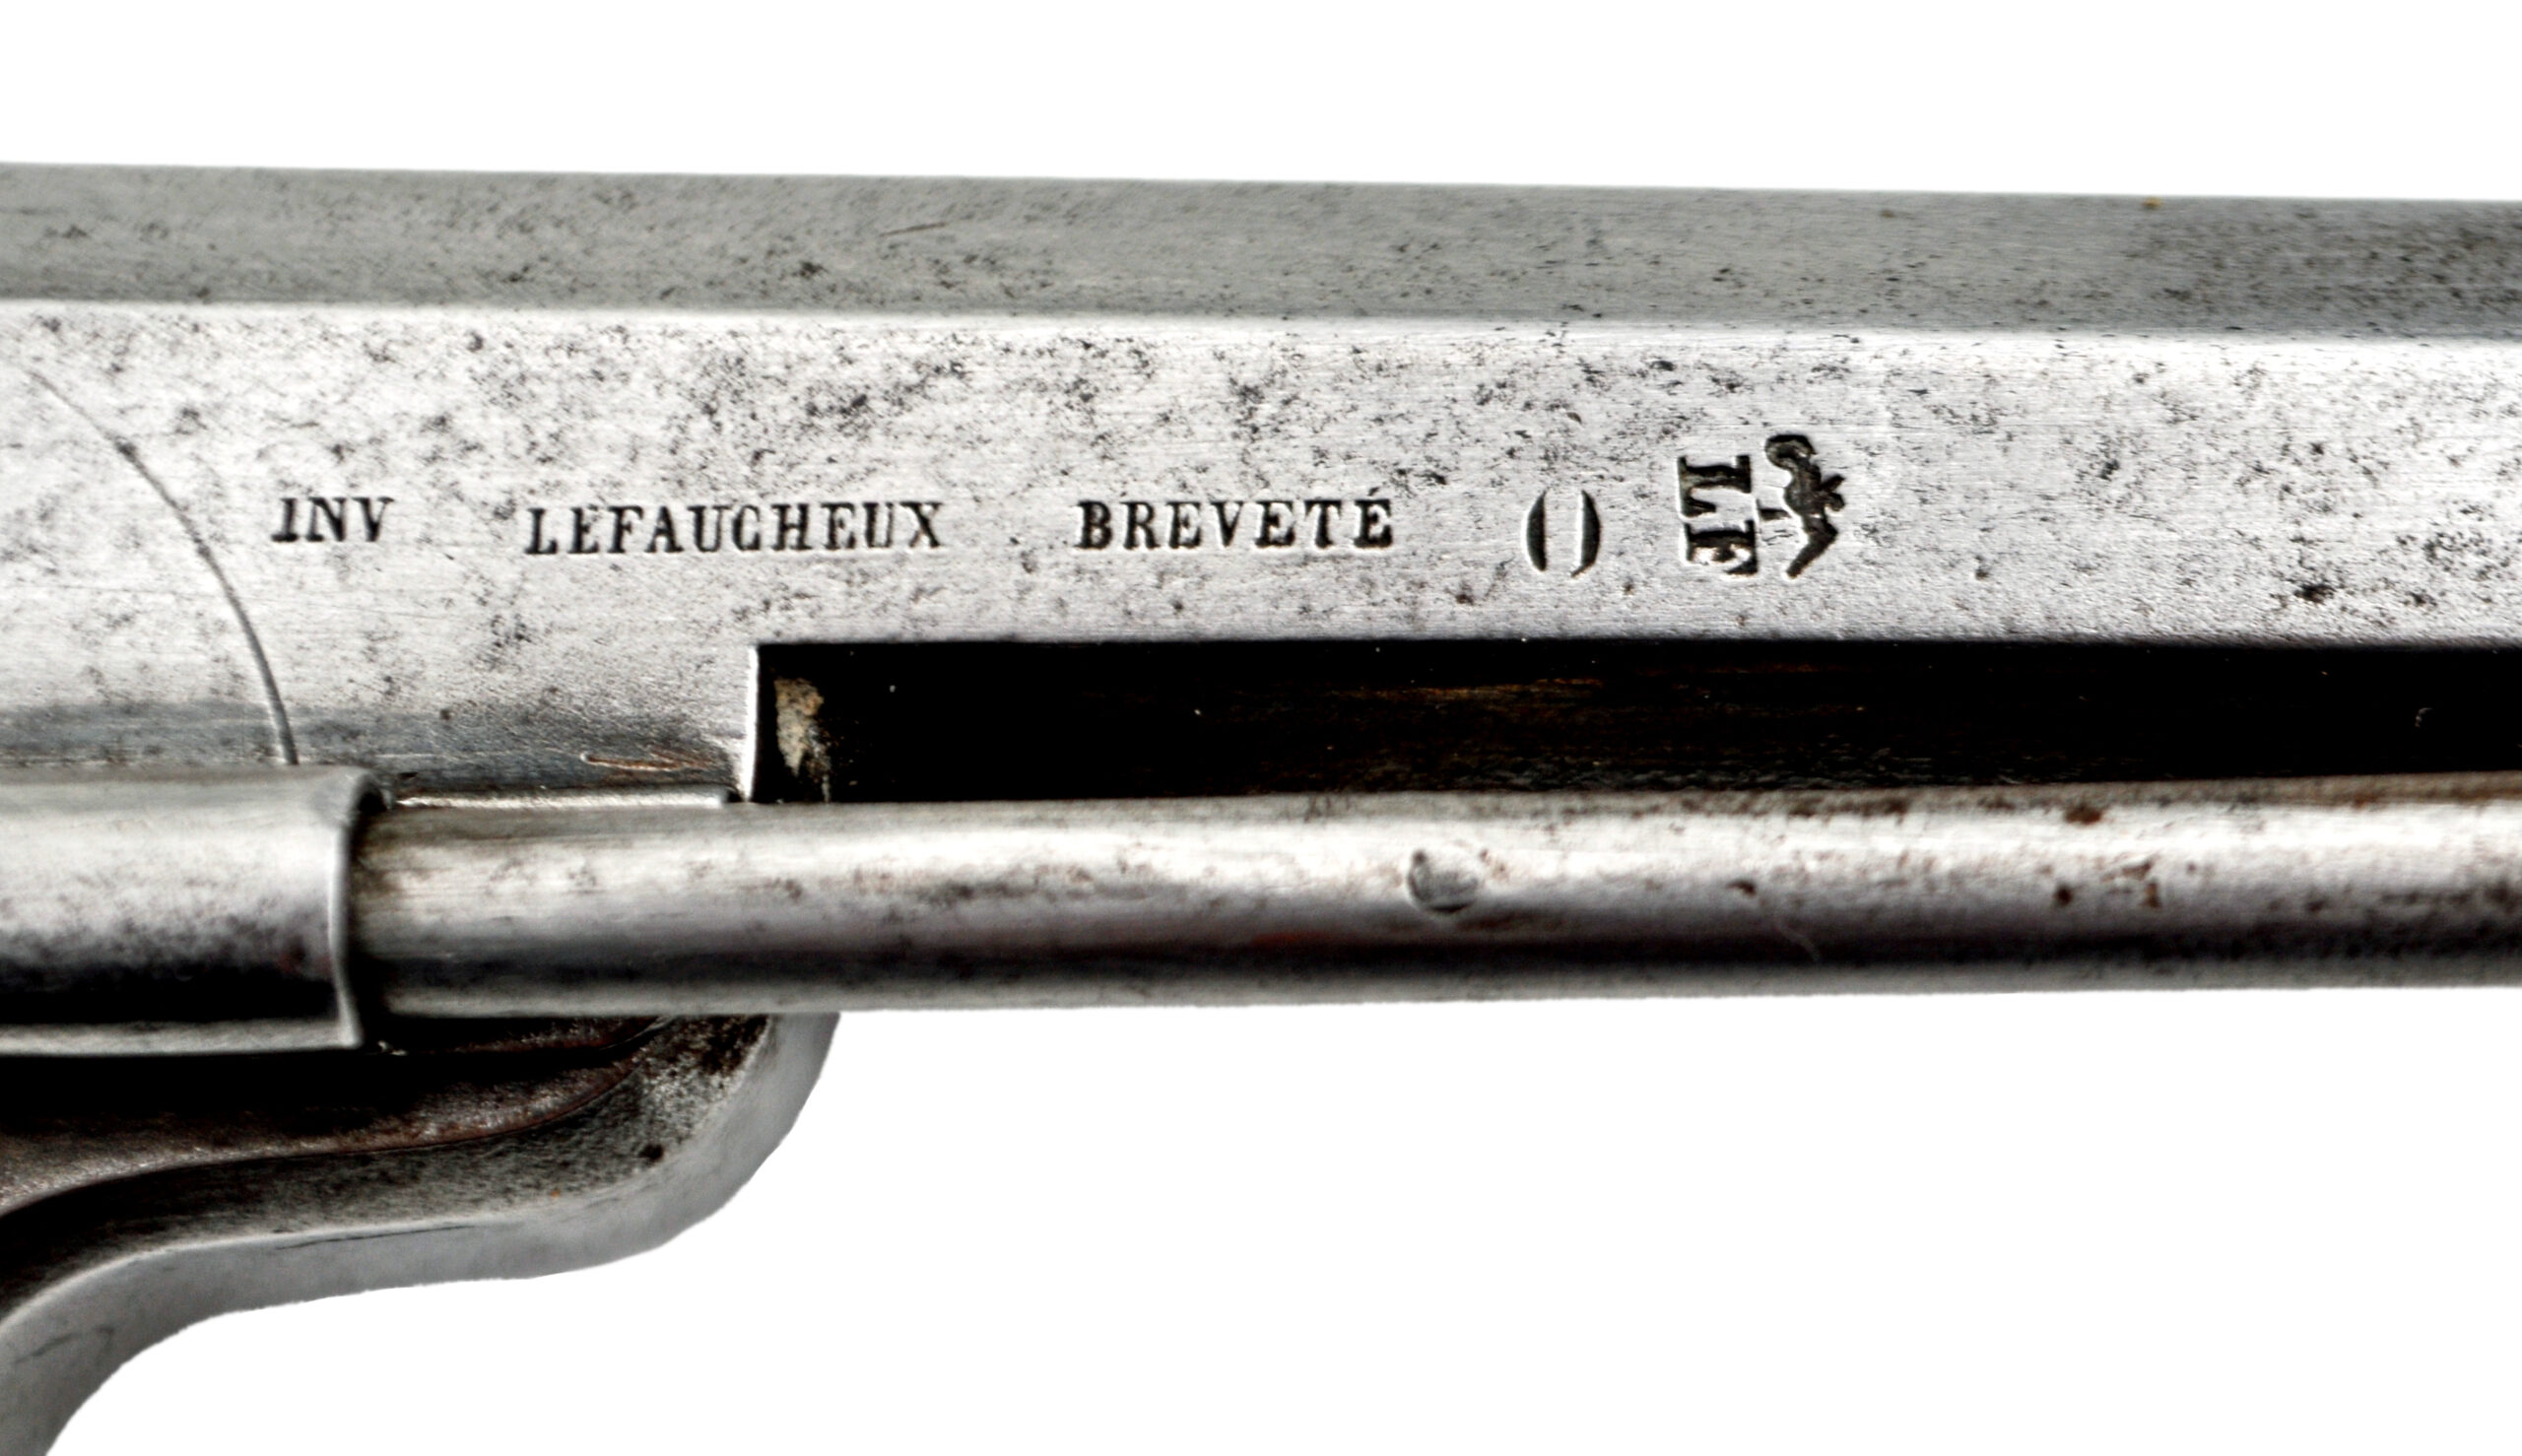 Lefaucheux marking on the barrel of the LF 0.